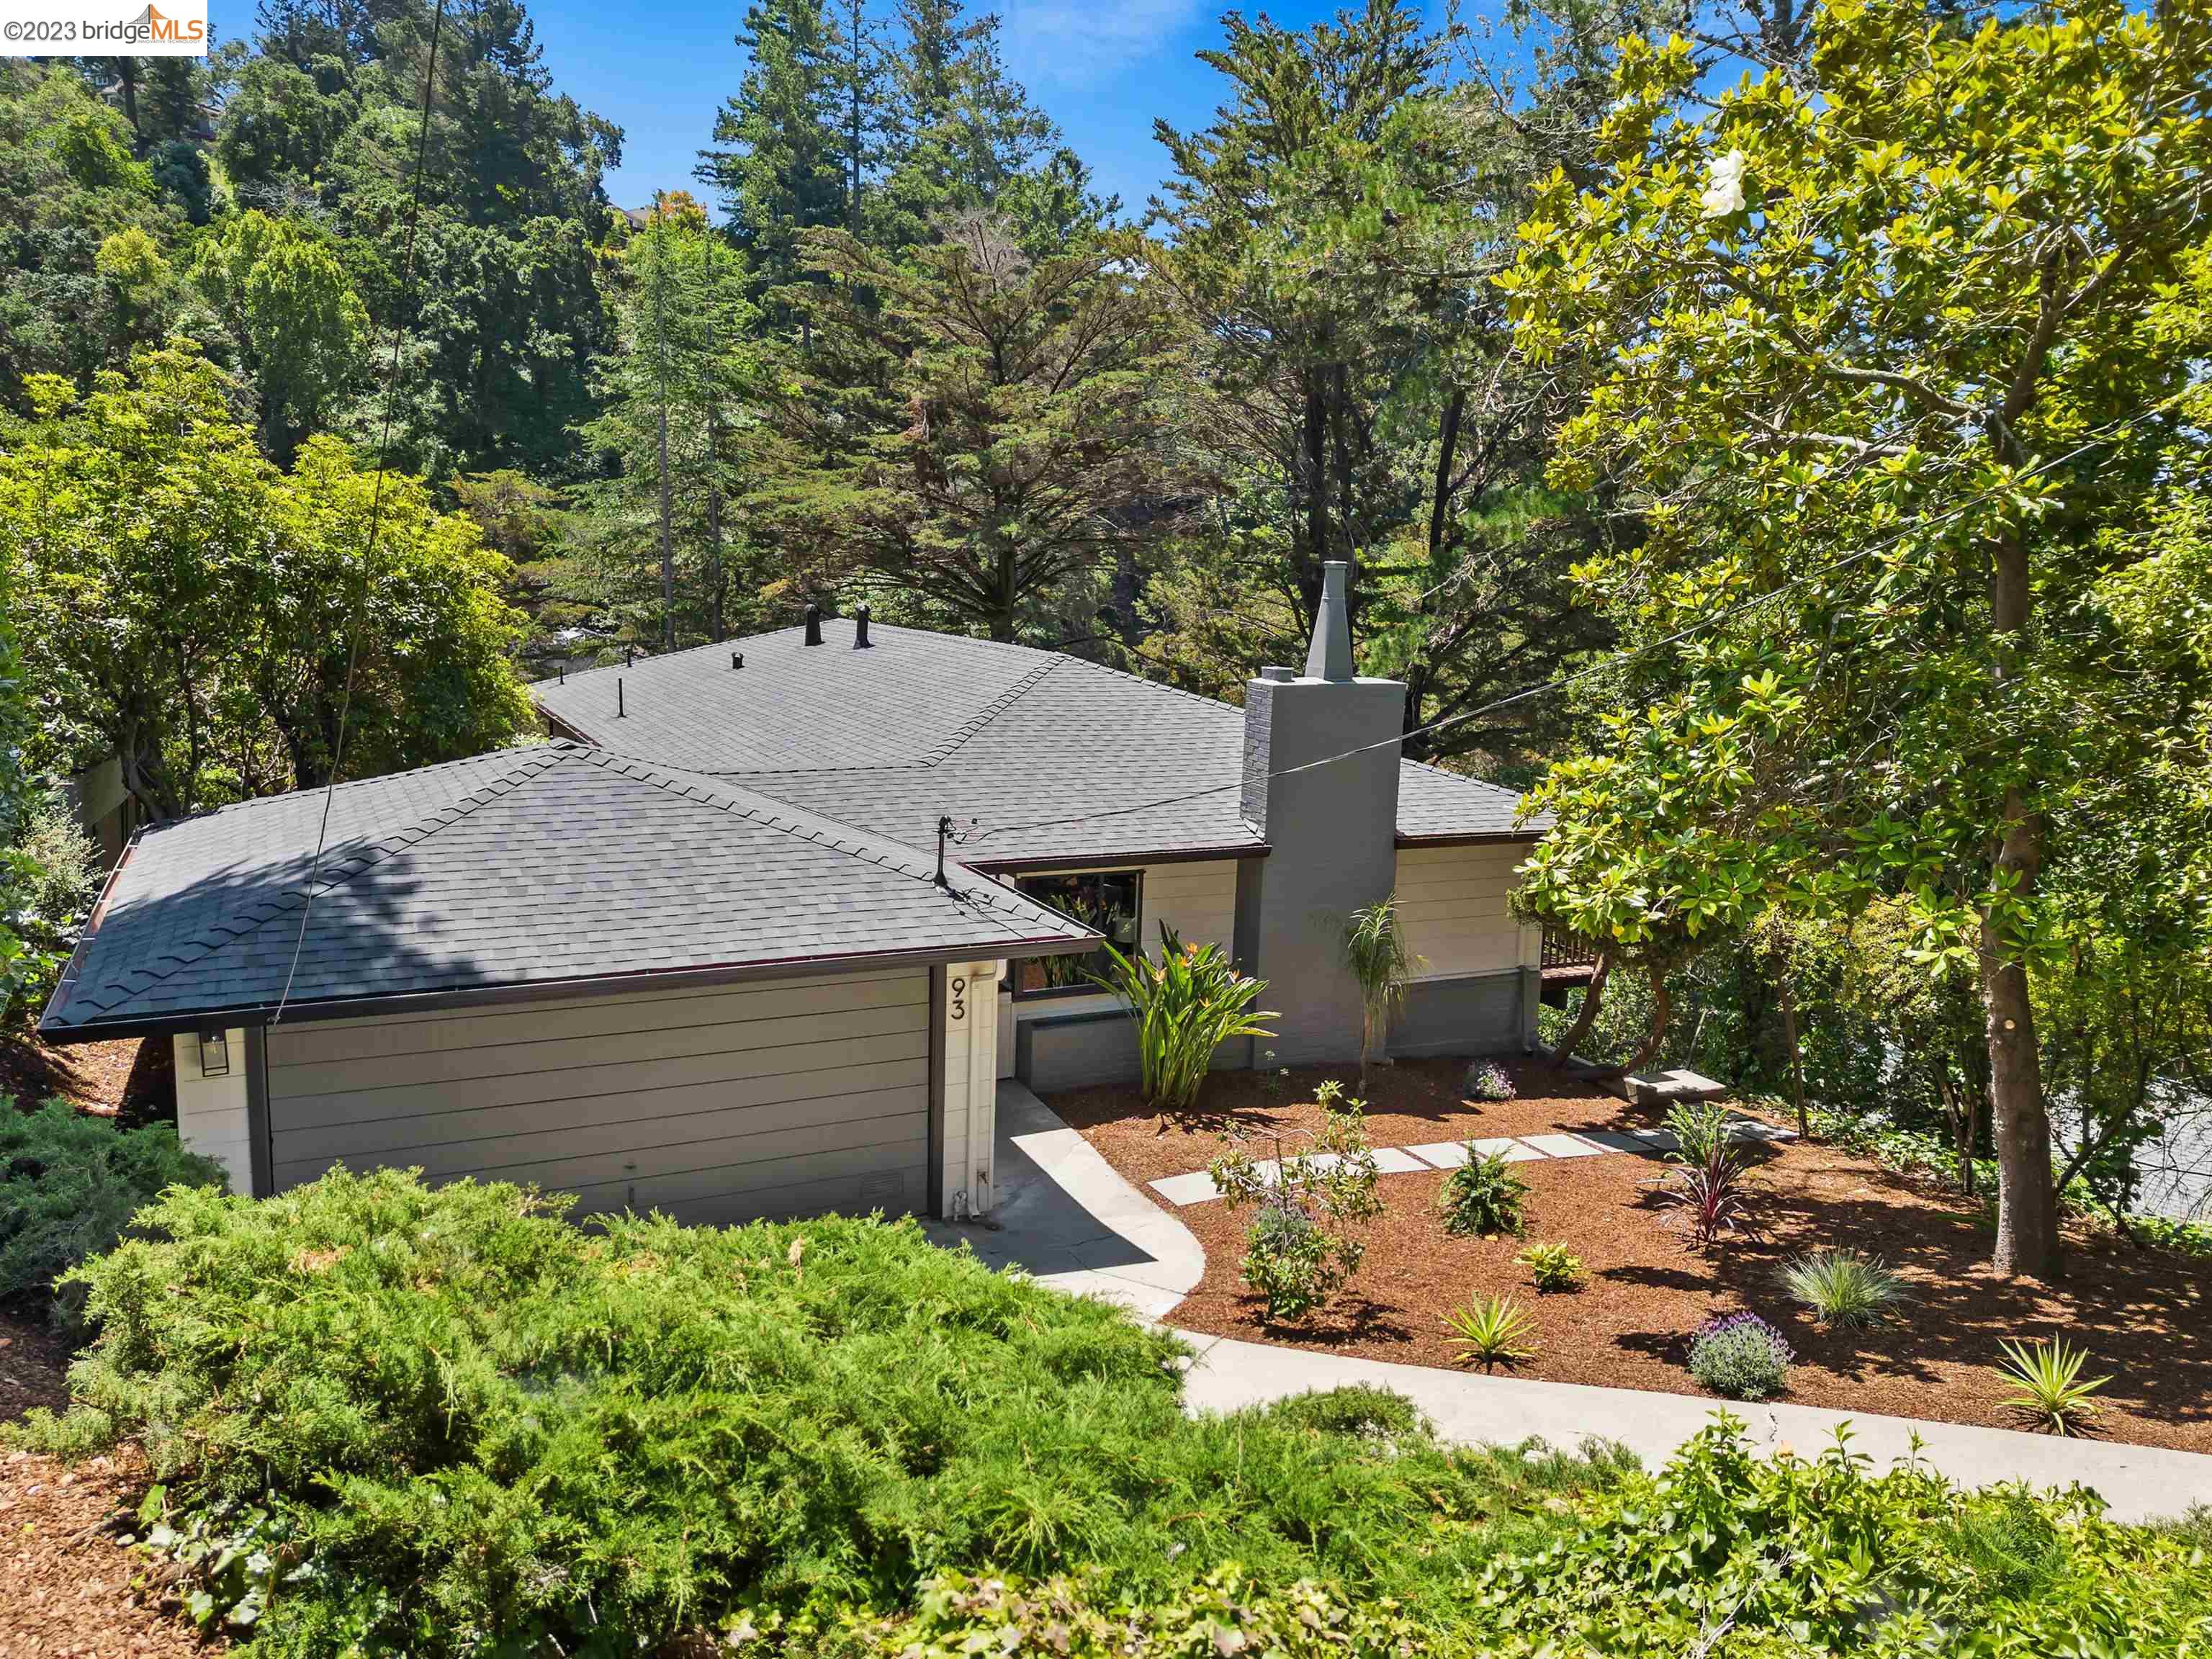 This hidden Jewel is located in the Upper Rockridge area of Oakland, within walking distance to Montclair on a quiet cul de sac.  This location is known for its beautiful tree-lined streets.  It is a highly sought-after neighborhood with a great sense of community. The exterior of the home has been well-maintained with a new roof, fresh paint, and landscaped grounds.  Inside, all rooms have been refinished, giving the home a warm and inviting feel.  The kitchen has been completely renovated with prefab quartz countertops, backsplash, refinished cabinets, undermount sink, disposal, refrigerator, dishwasher and a new gas stove, among other upgrades. Downstairs, there is new carpeting for added comfort.  You also have the opportunity to entertain on the deck or patio, or just enjoy quiet evenings alone.  Overall, this property offers a combination of modern upgrades and classic charm, making it a great place to call home.